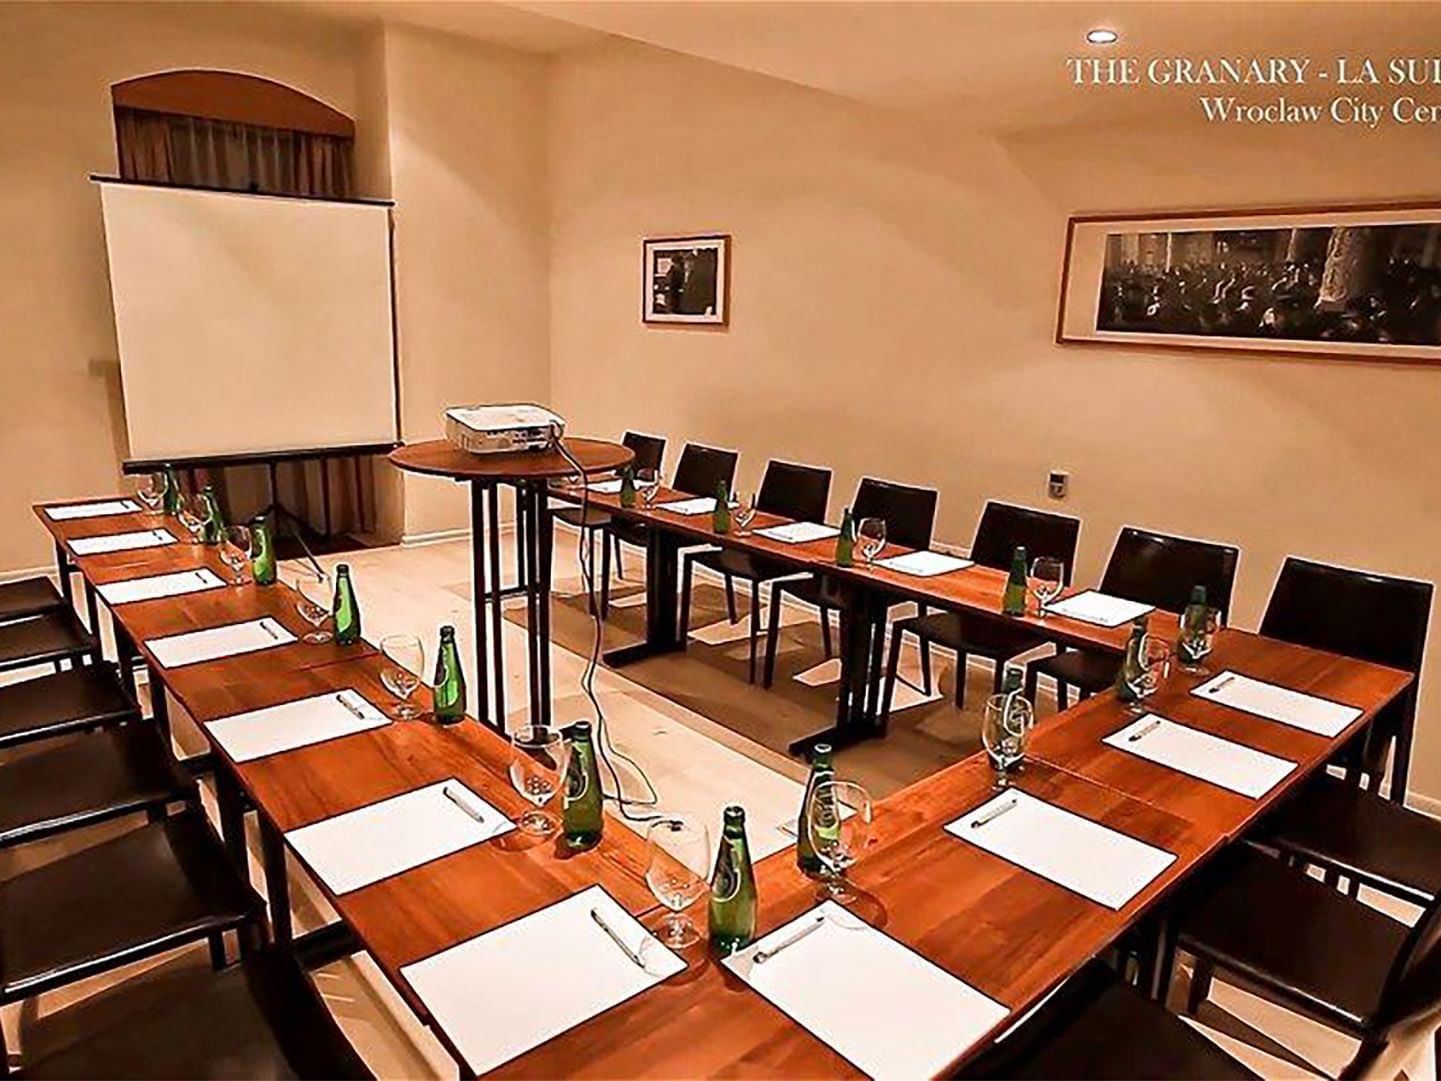 The Garden Room for Meetings at The Granary La Suite Hotel